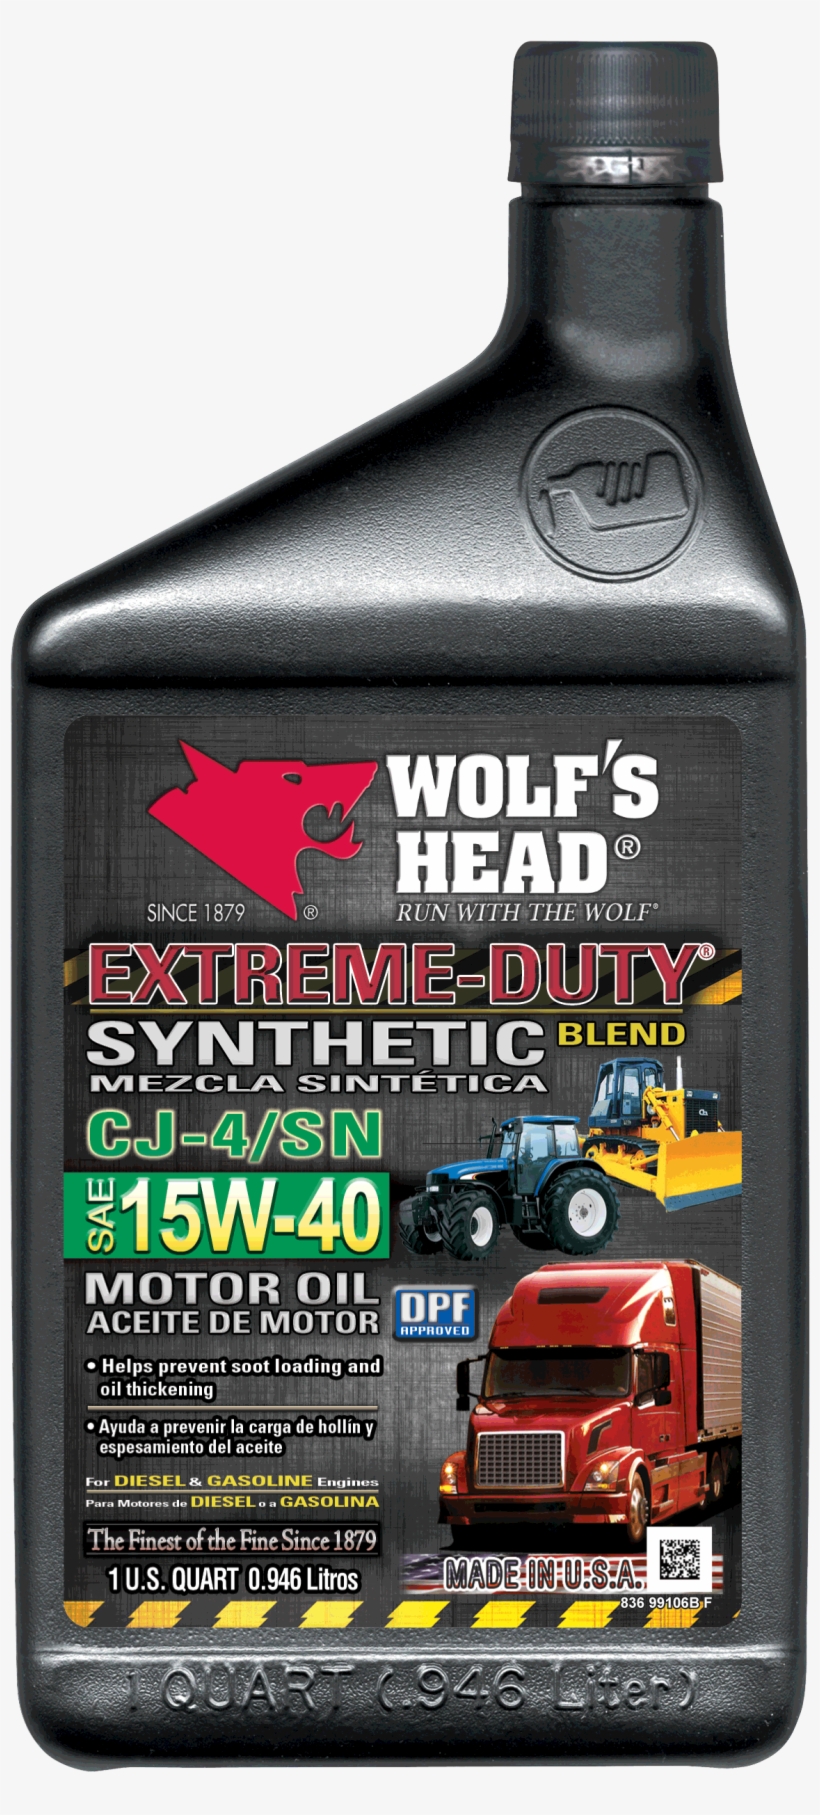 Wolf's Head Extreme Duty 15w40 - Wolf’s Head Extreme Duty Synthetic-blend 15w40 Motor, transparent png #4777773